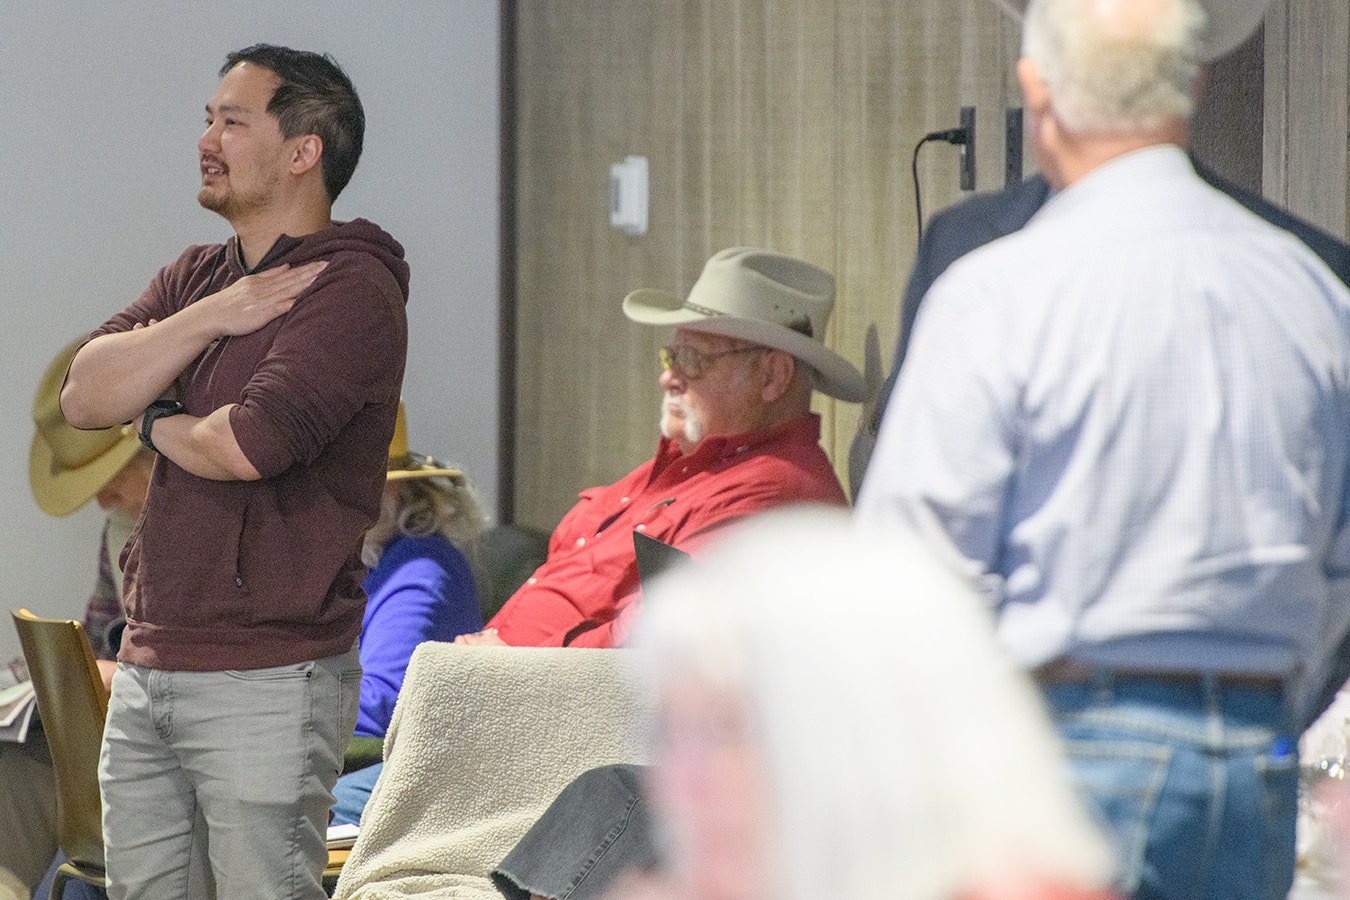 State Rep. Mike Yin, D-Jackson, was a blue dot in a sea of red this past weekend when he attended the Wyoming Republican Party Central Committee meeting in Jackson.